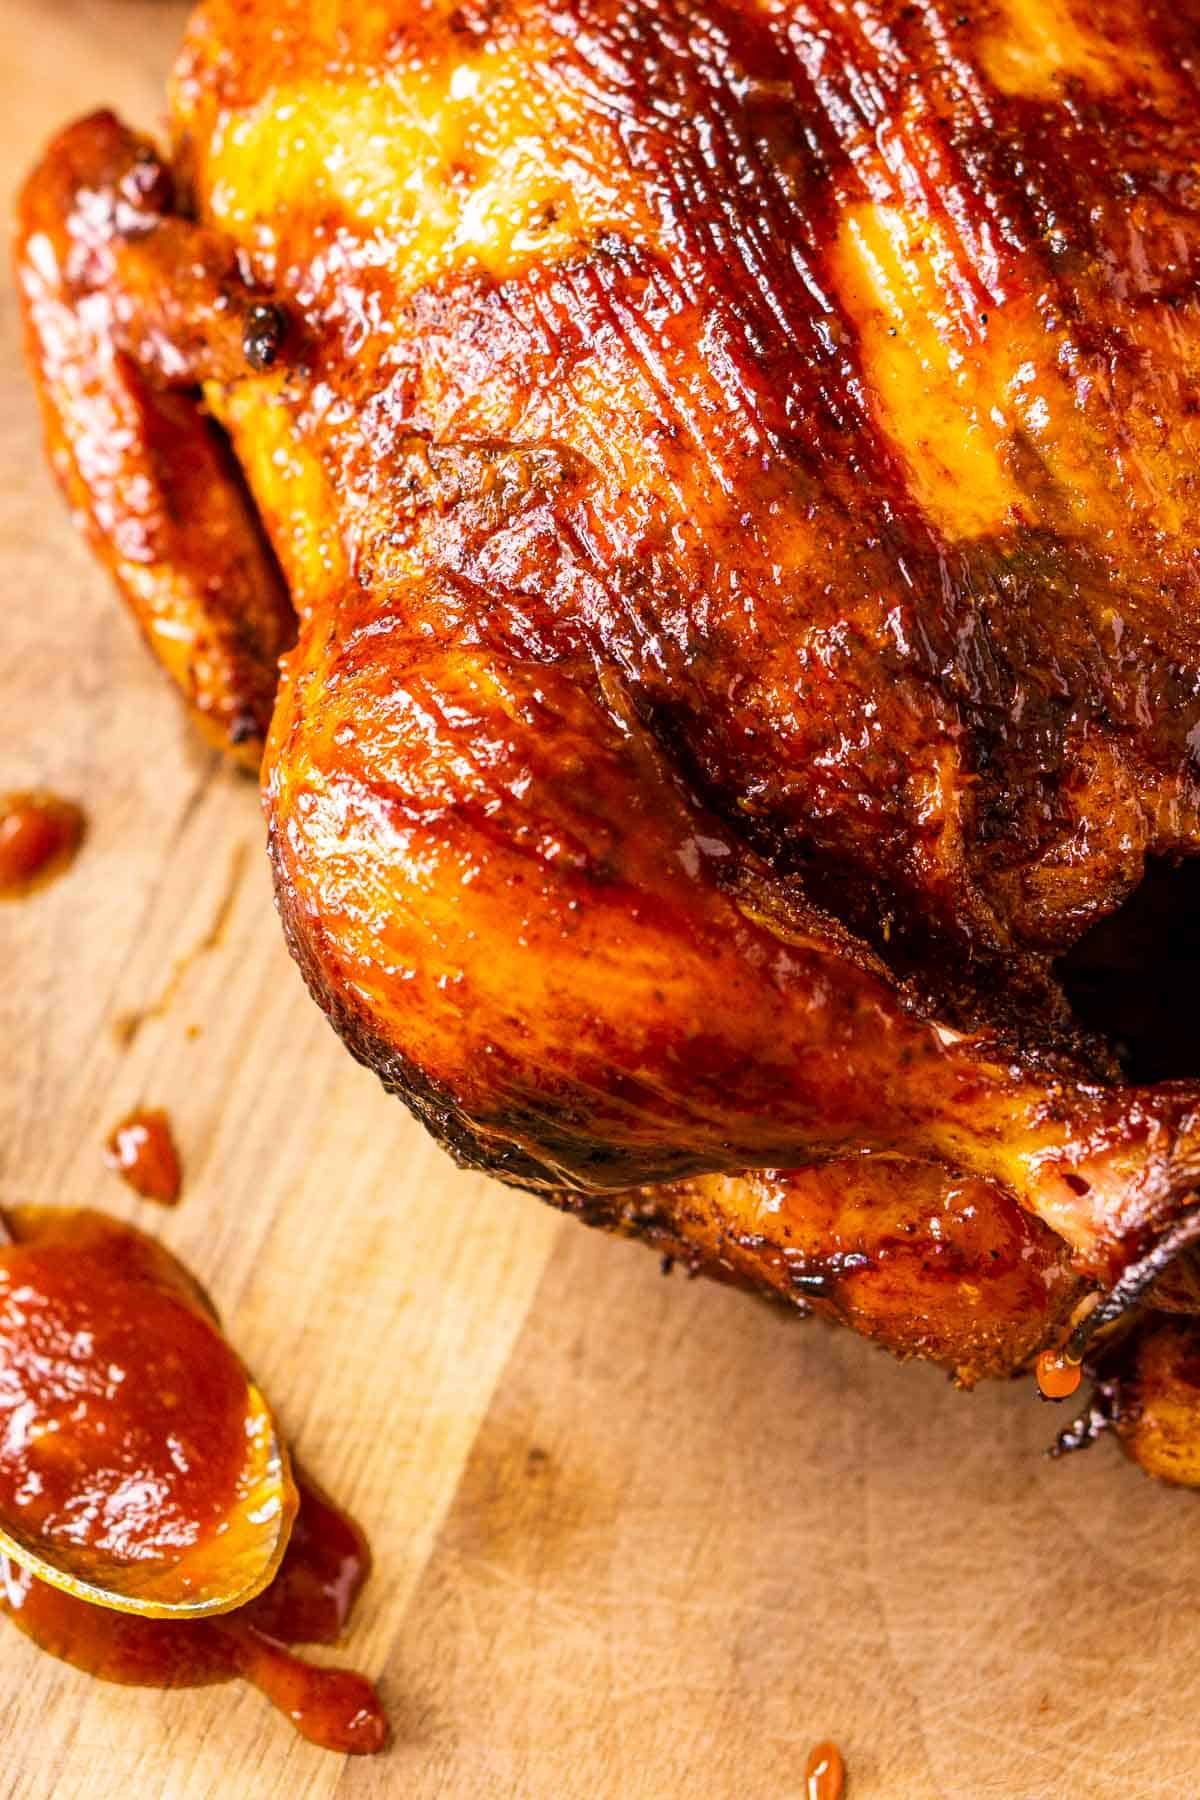 A close-up of the smoked whole chicken with BBQ sauce to the side.